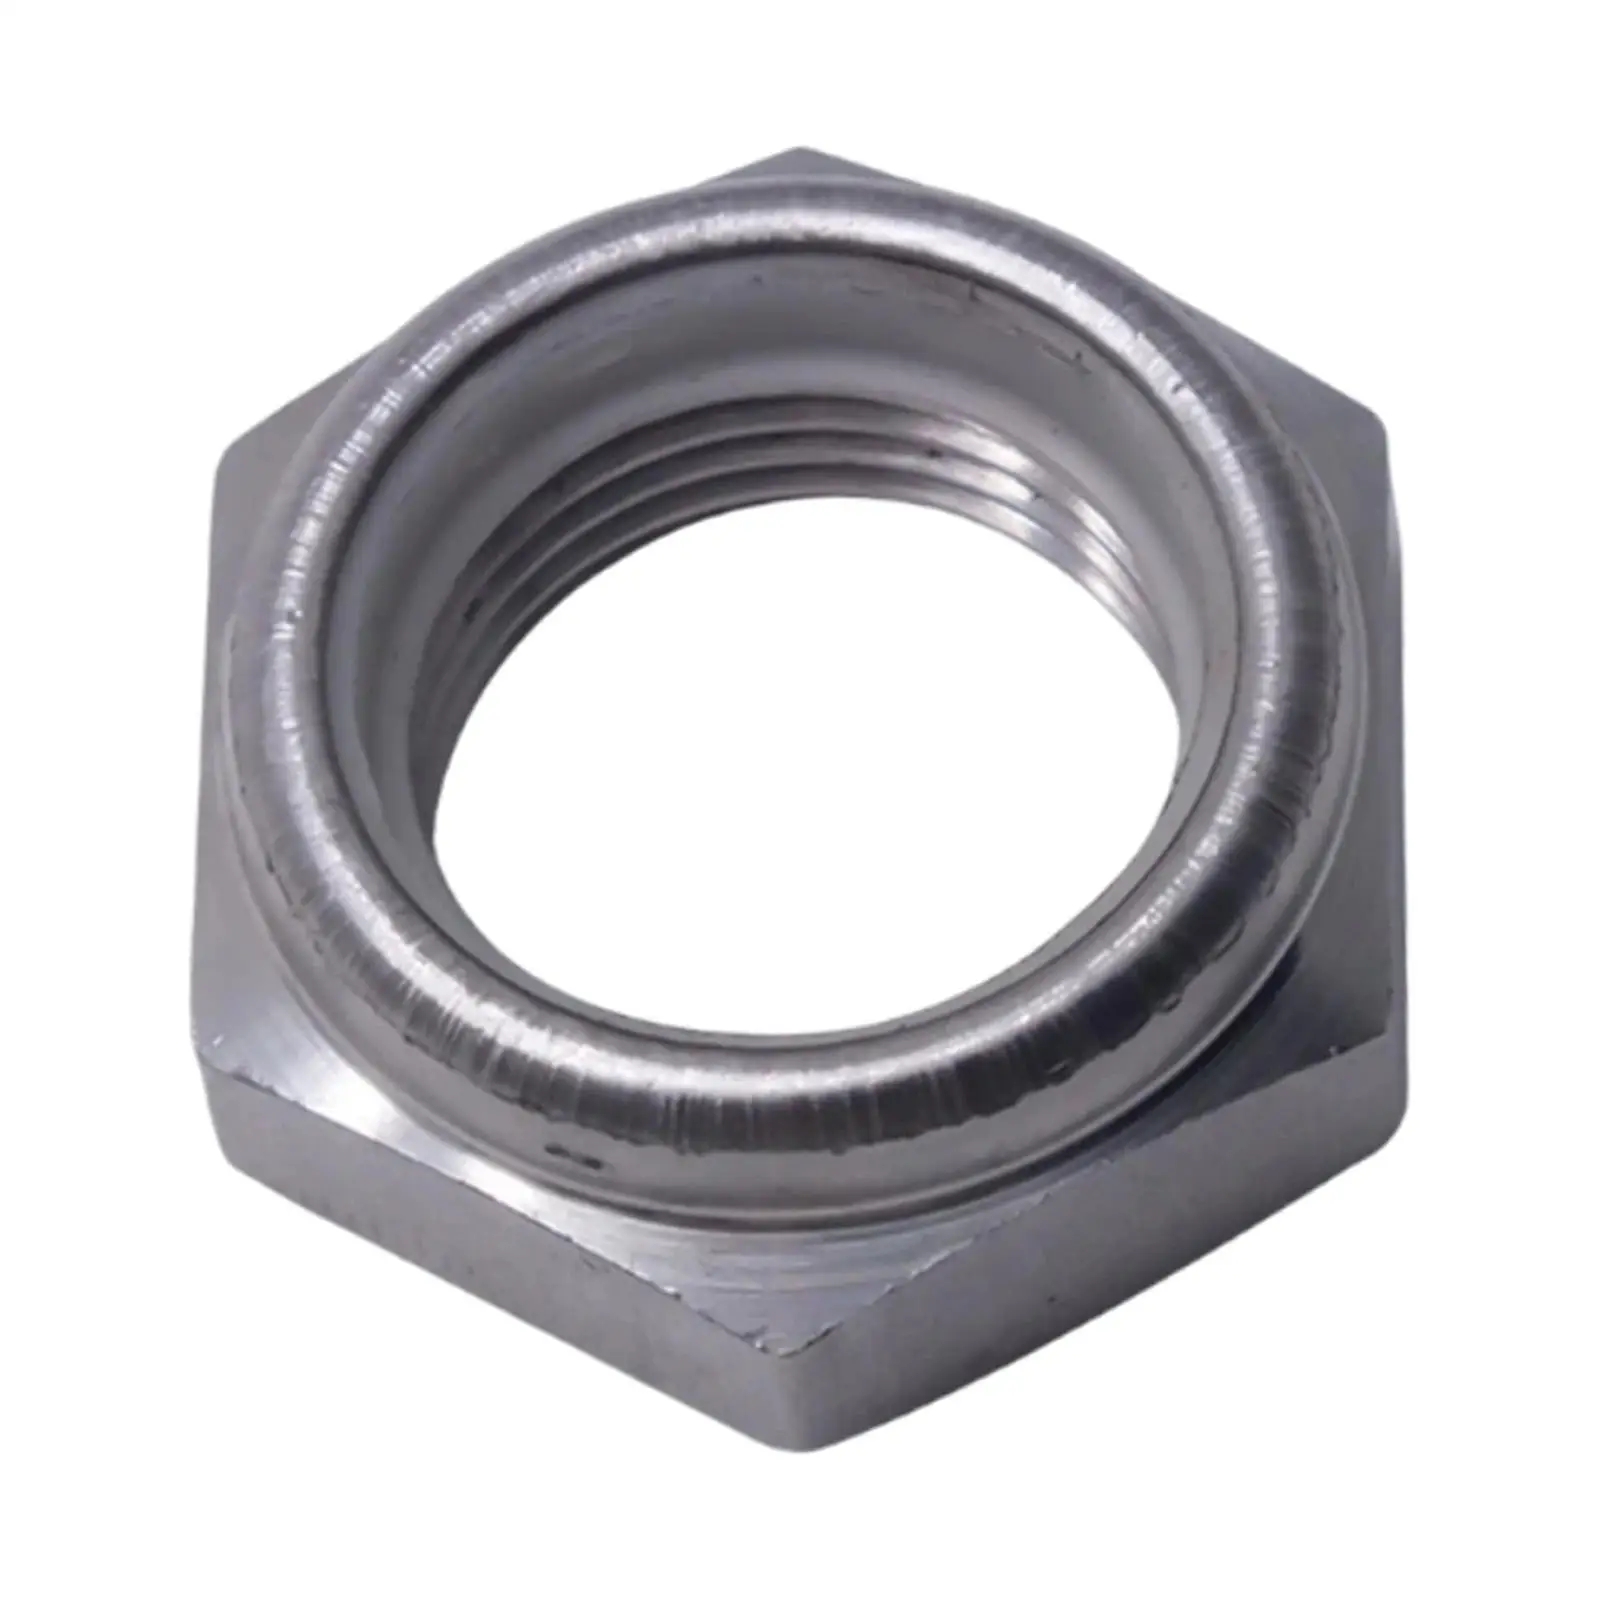 Replacement Self Locking Nut 90185-22043 Sturdy for Yamaha Convenient Installation Automotive Accessories Good Performance